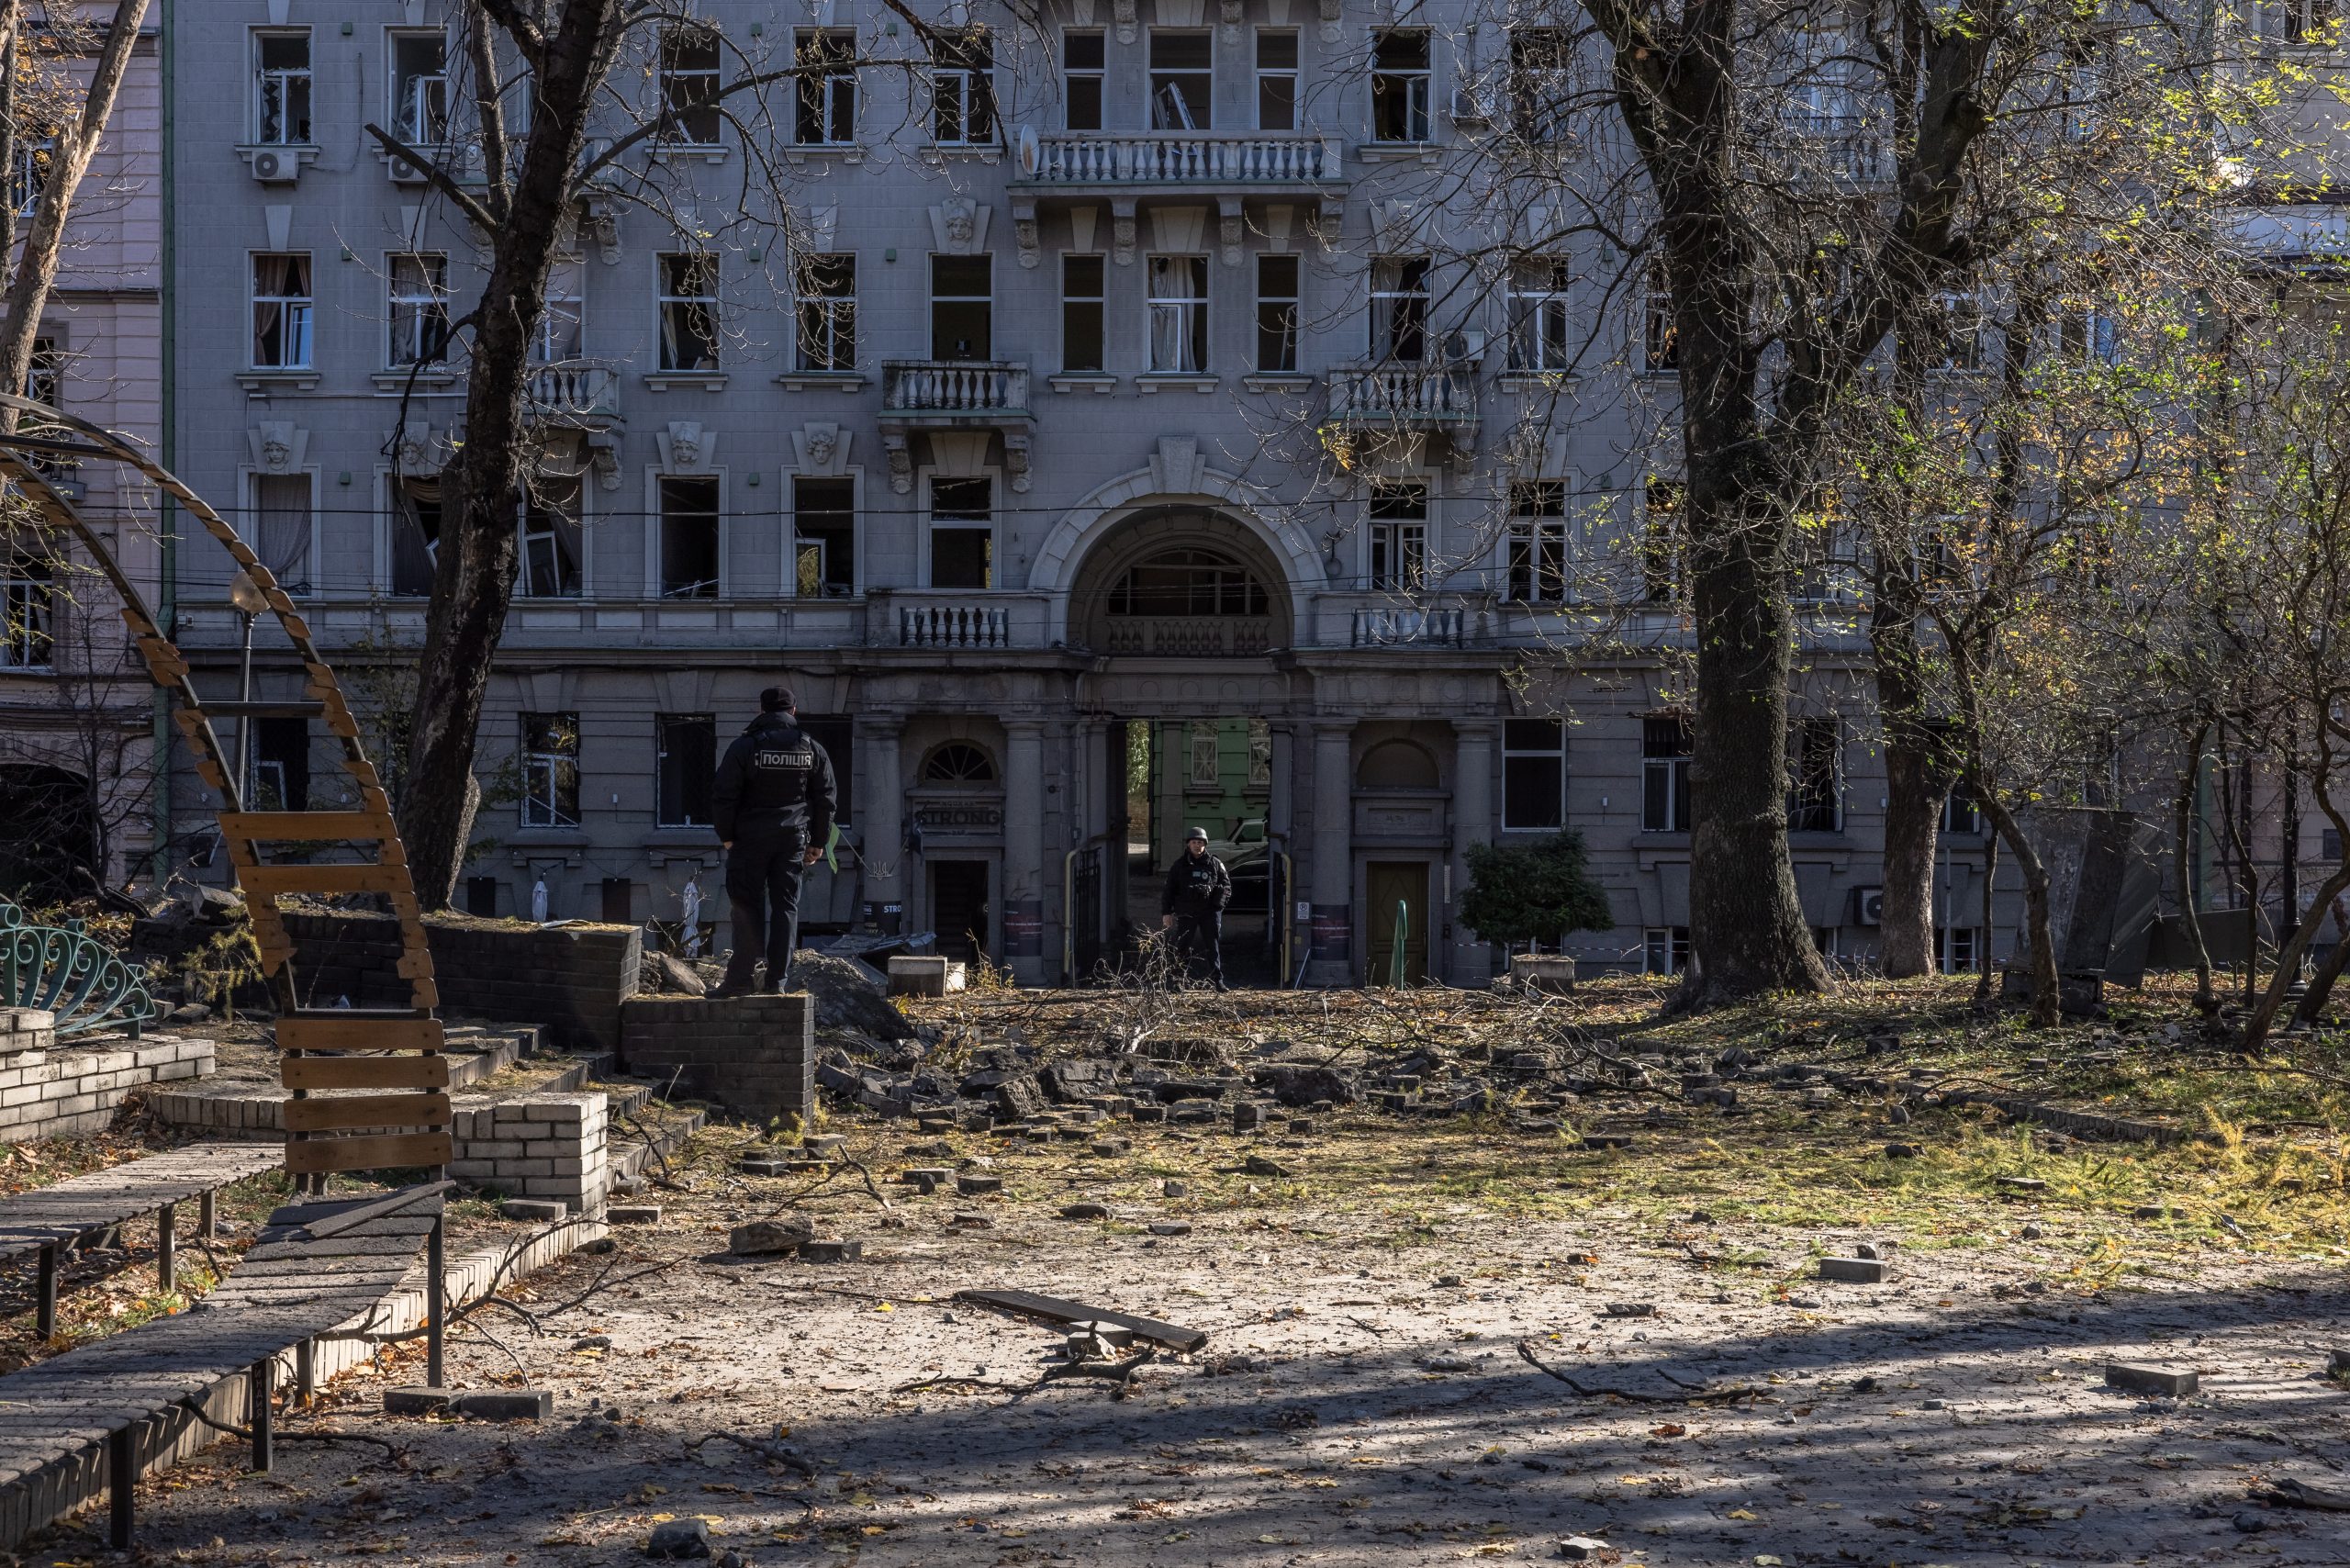 epa10234505 Police officers stand guard next to a damaged children's playground and buildings following missile strikes in downtown Kyiv (Kiev), Ukraine, 10 October 2022. Explosions have been reported in several districts of the Ukrainian capital Kyiv on 10 October. At least 11 people died and dozens injured as a result of rocket attacks targeting cities across Ukraine, the State Emergency Service (SES) of Ukraine said. Russian troops entered Ukraine on 24 February 2022 starting a conflict that has provoked destruction and a humanitarian crisis.  EPA/ROMAN PILIPEY